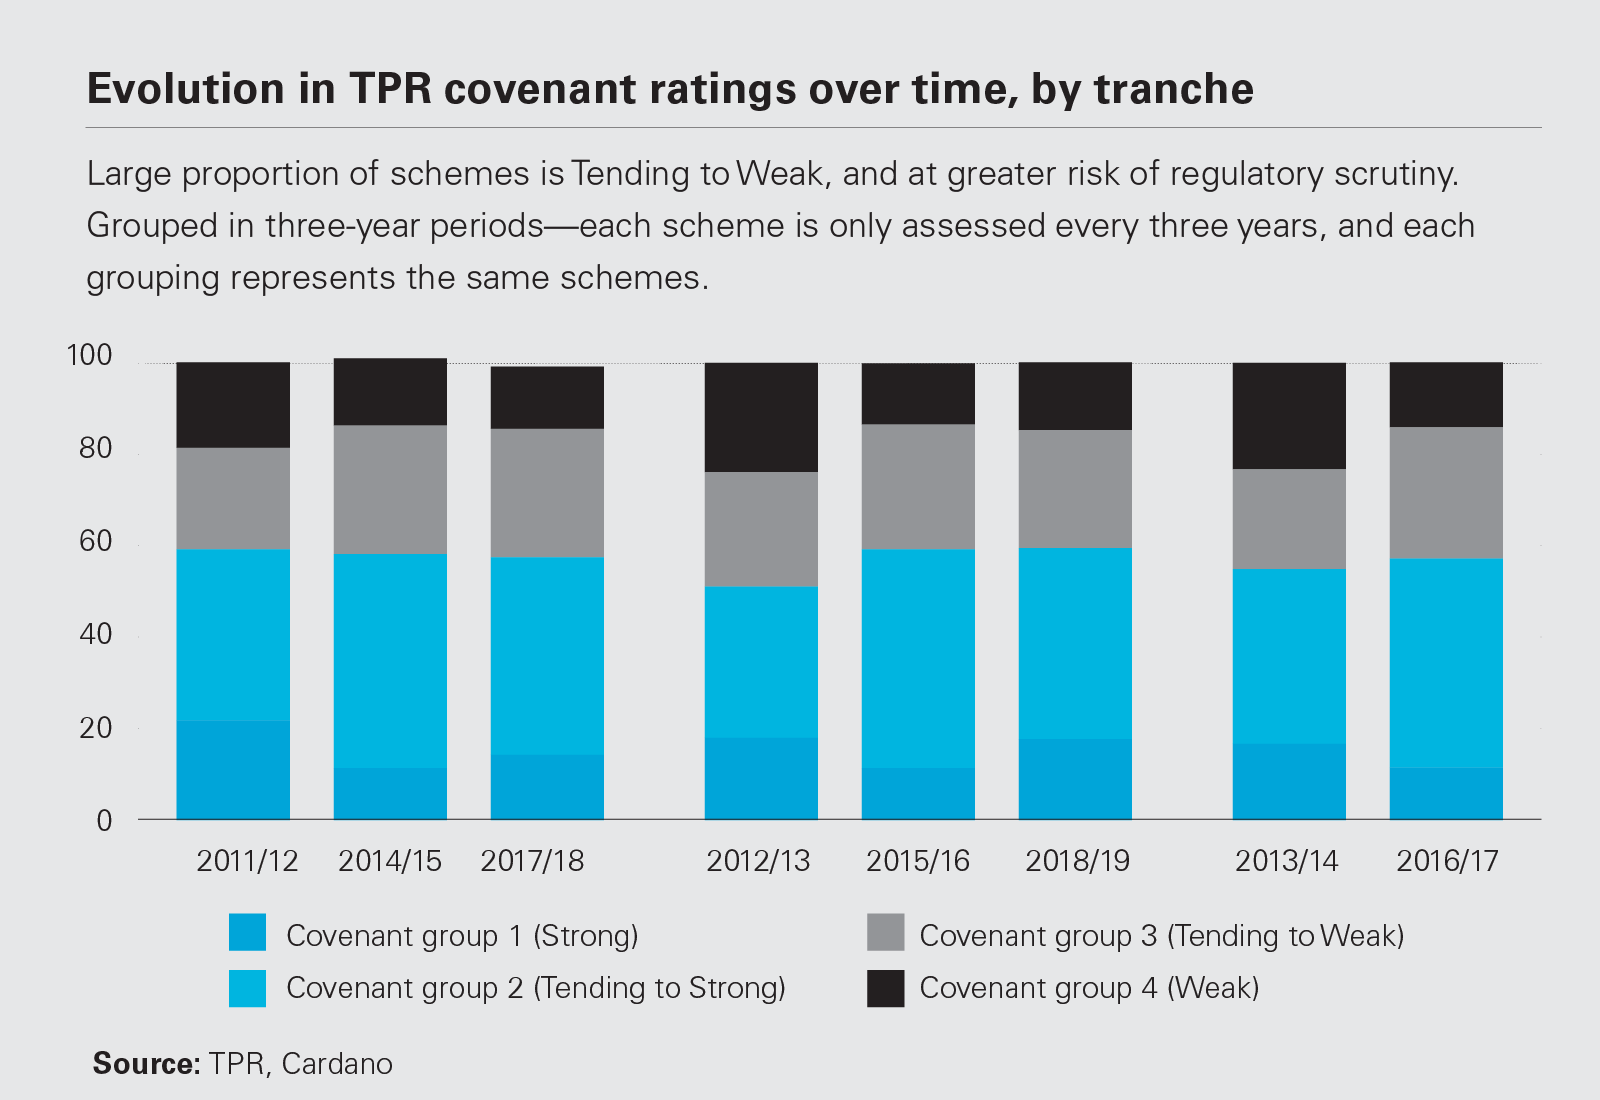 Evolution in TPR covenant ratings over time, by tranche